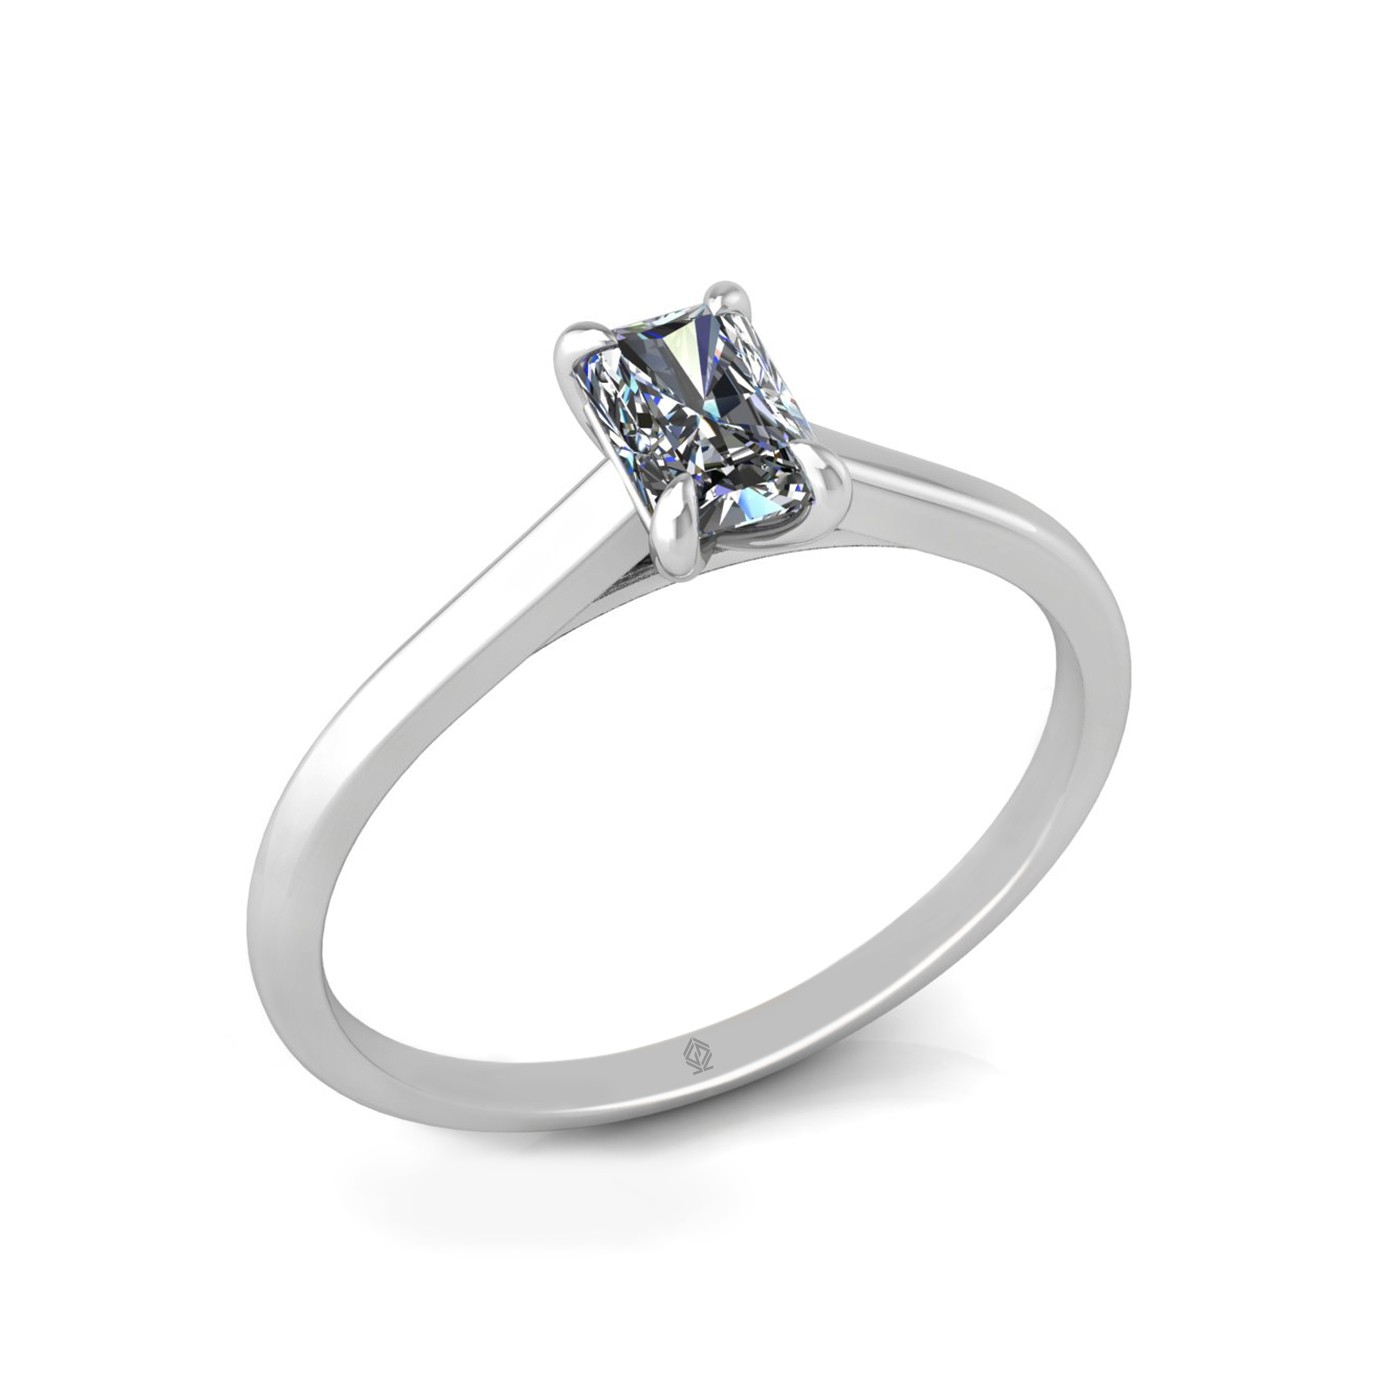 18k white gold  0,50 ct 4 prongs solitaire radiant cut diamond engagement ring with whisper thin band